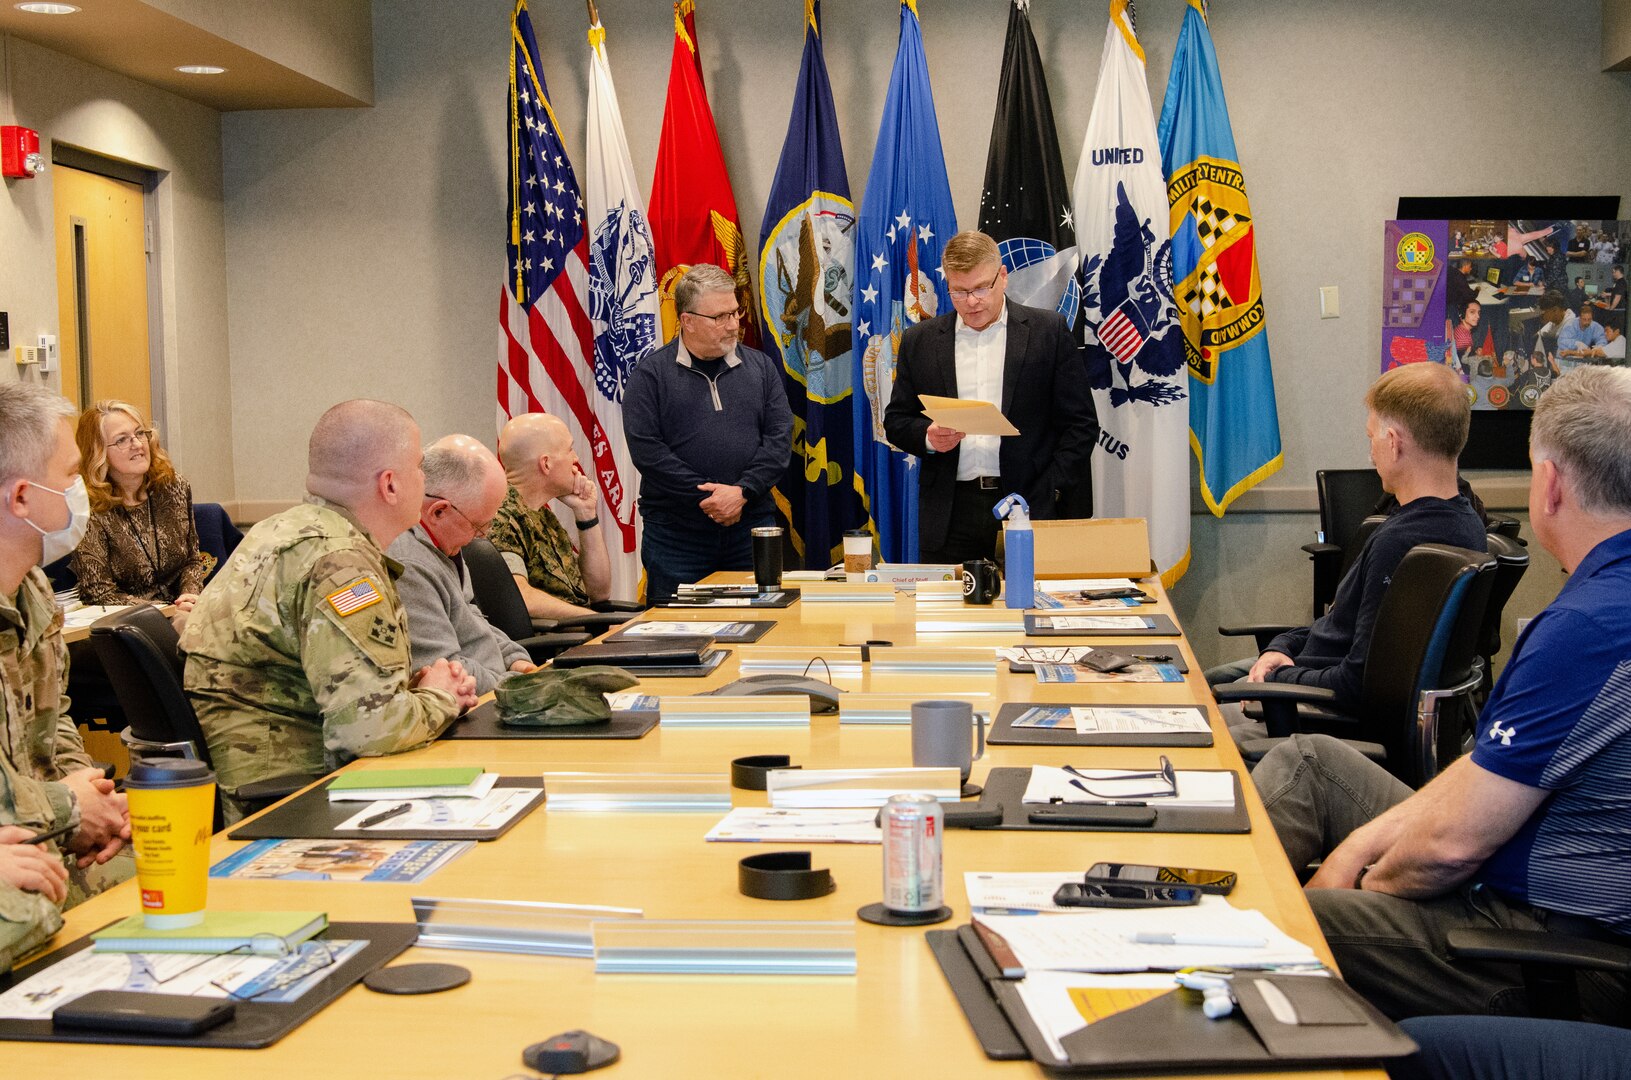 Donovan Phillips, USMEPCOM Chief of Staff, (right) reads the citation for an honorary Hamby award presented to David Hamby, USMEPCOM inspector general (left) during a command and staff meeting, May 6. The Hamby award, usually presented to Soldiers at Fort Irwin, was created in memory of the late U.S. Army Col. Jerrell Hamby, David’s father.